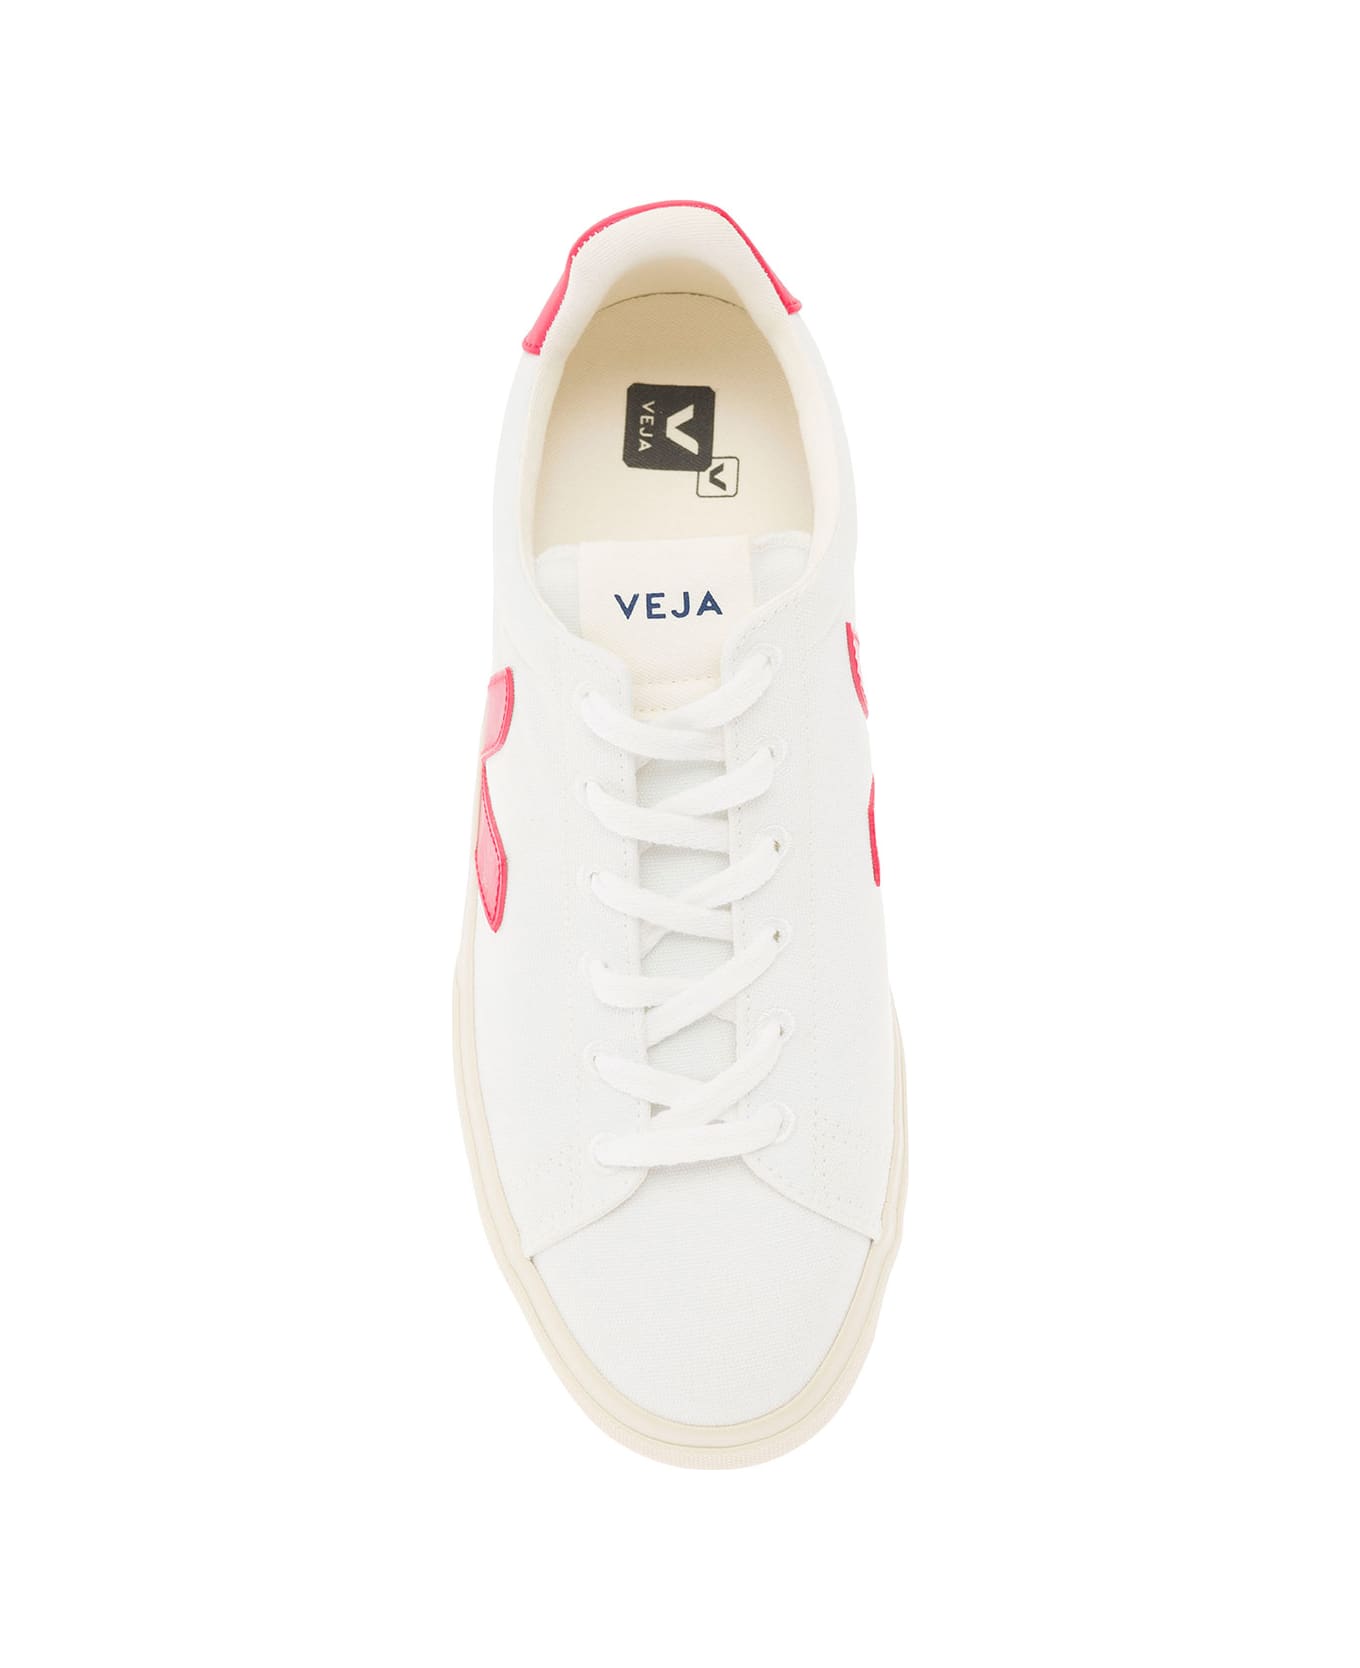 Veja White And Fuchsia Sneakers With Logo Details In Leather Man - White スニーカー